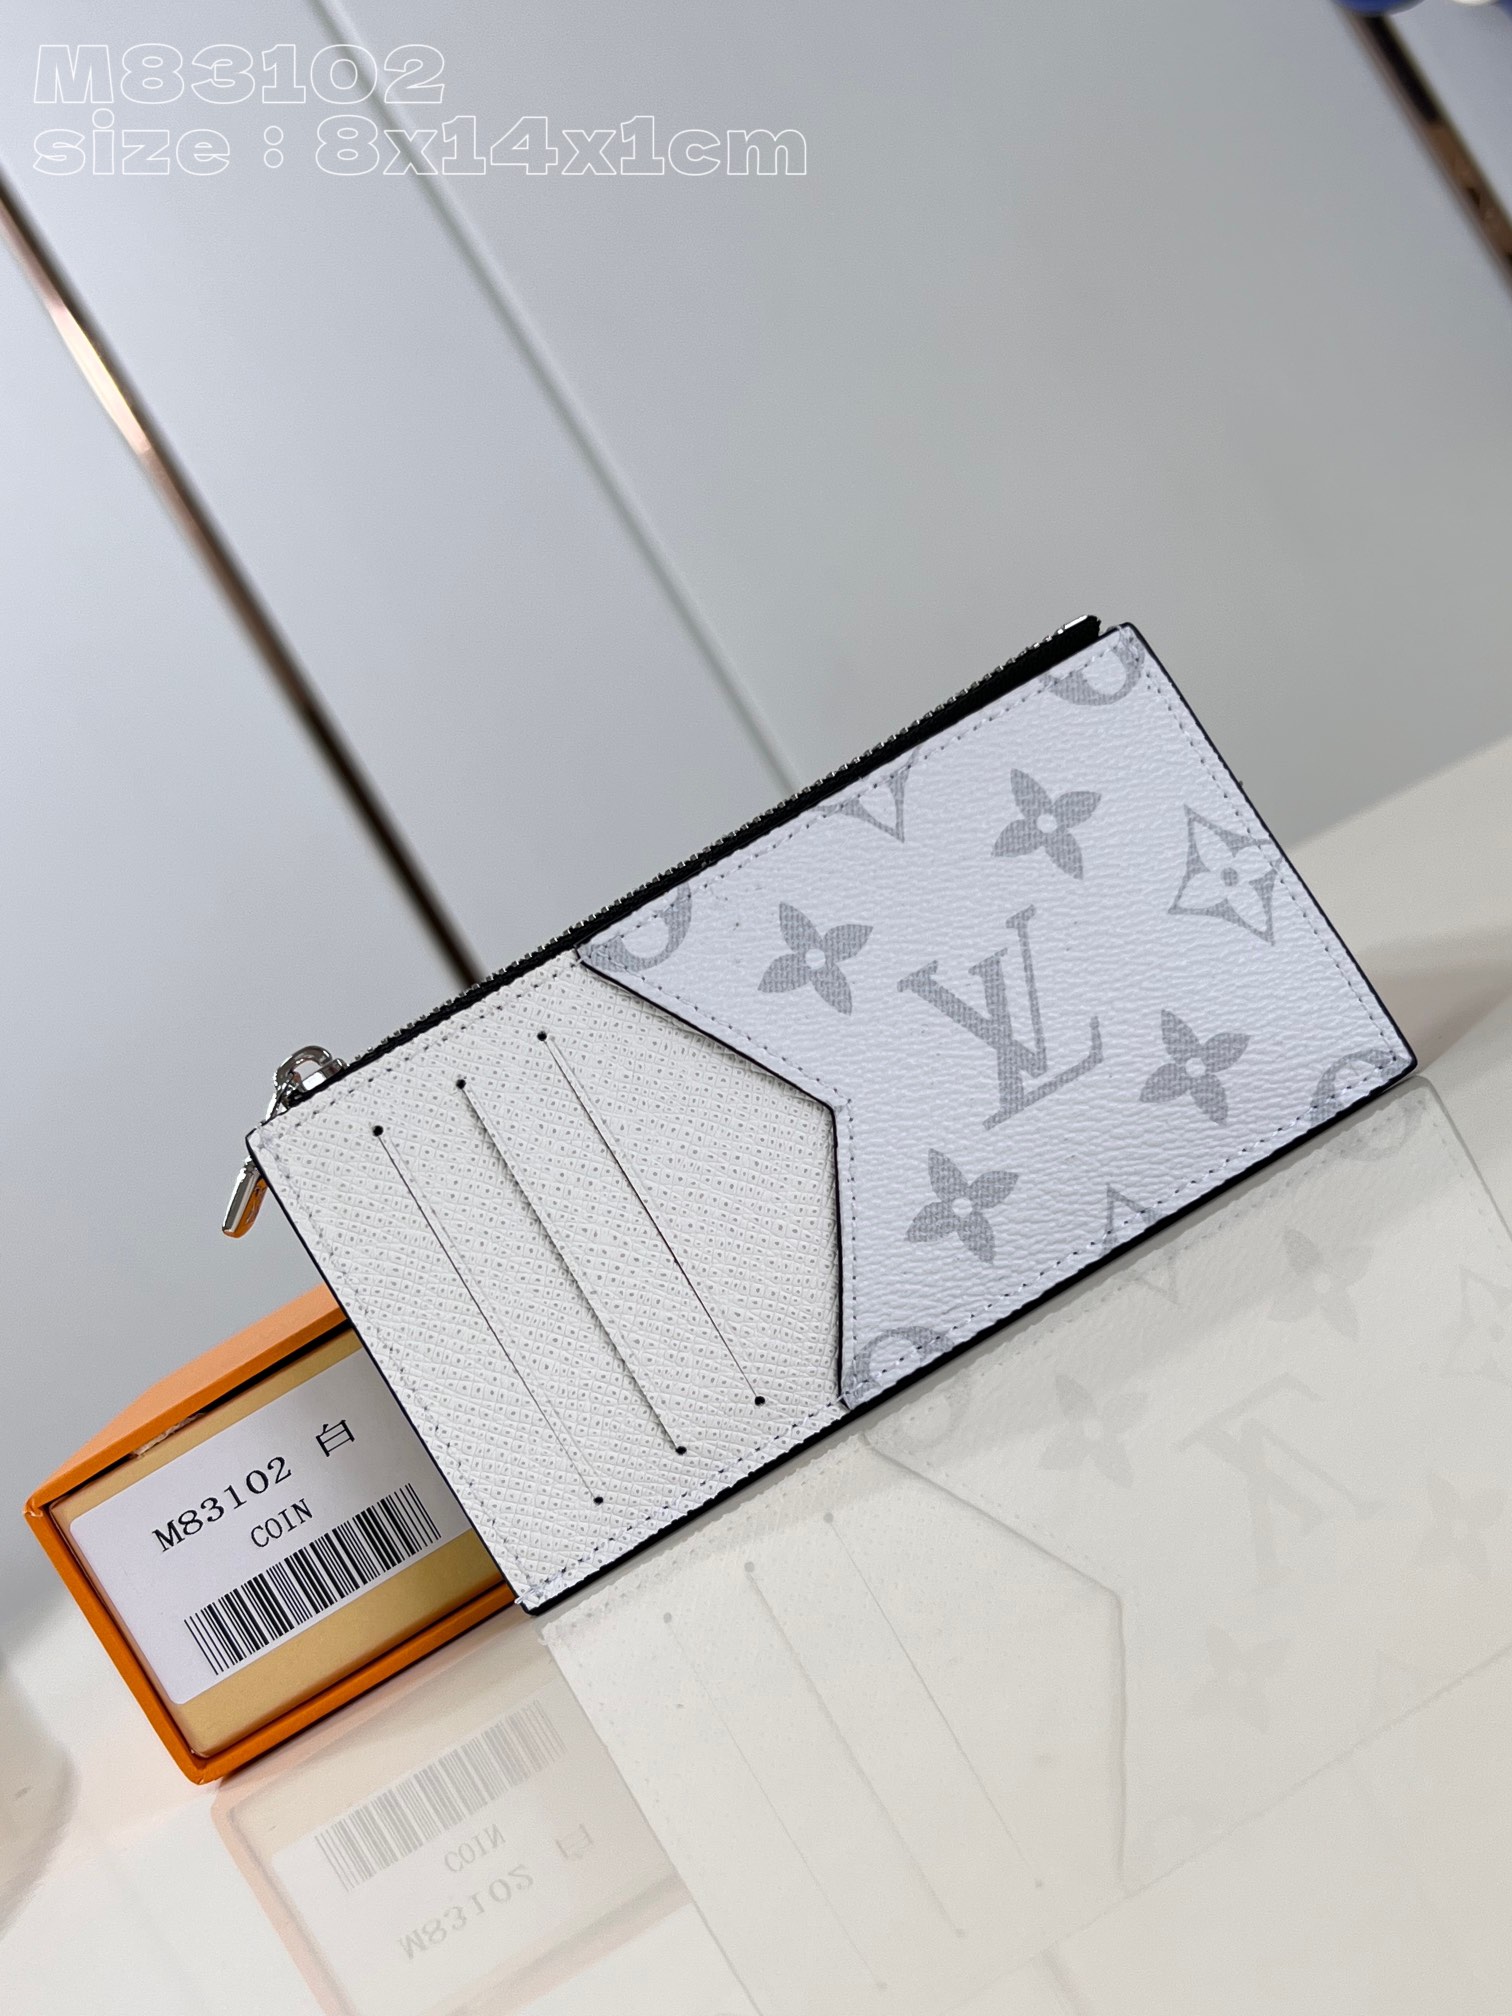 Louis Vuitton Wallet Card pack Buy the Best High Quality Replica
 White Monogram Canvas Summer Collection M83102